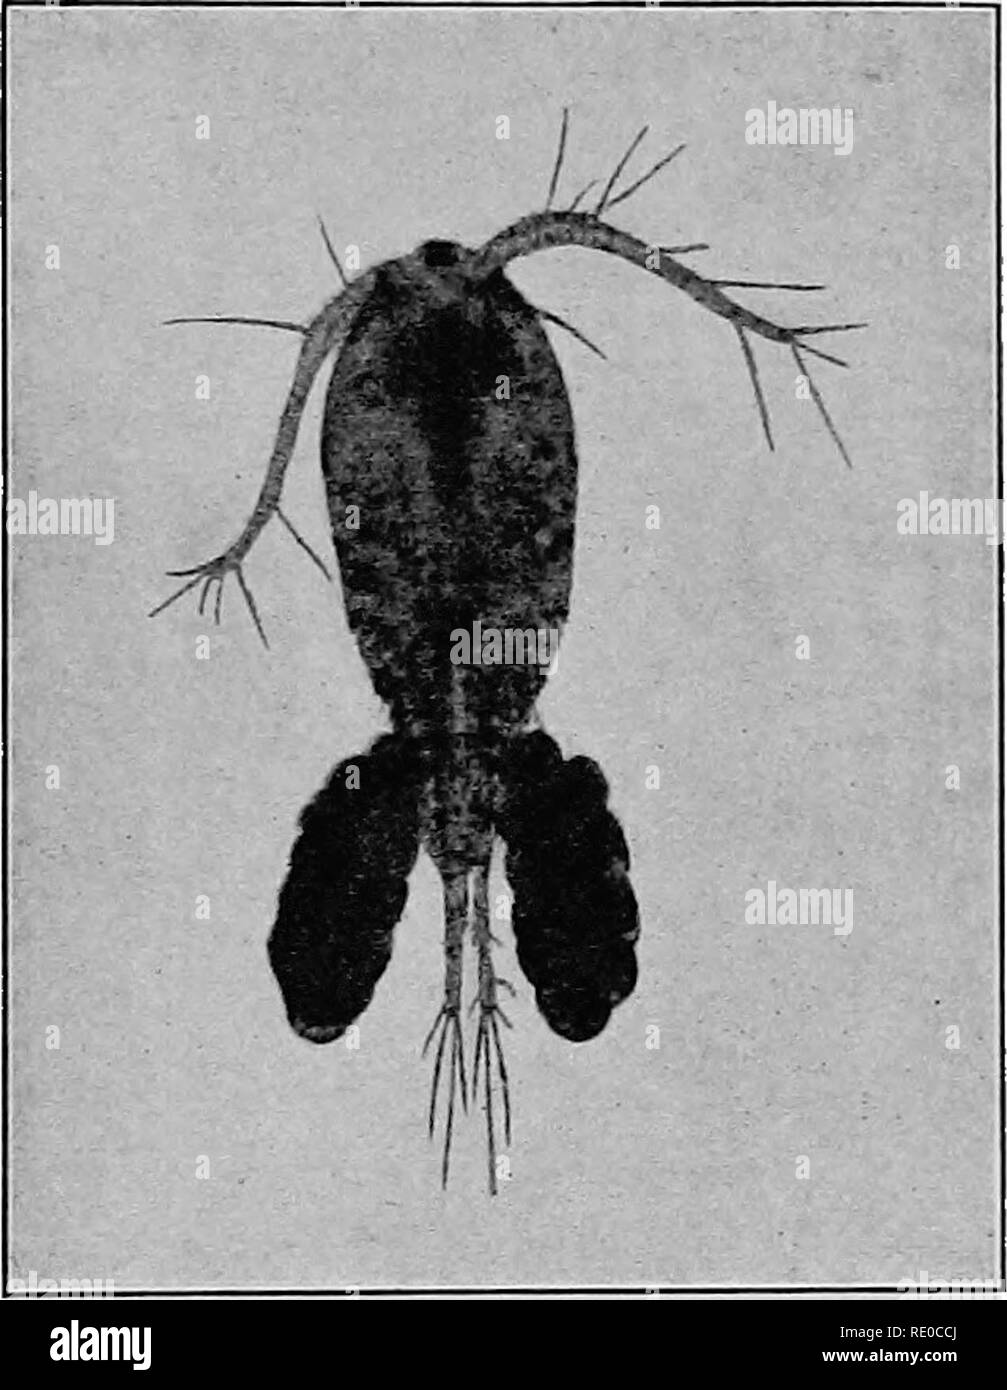 . The life of inland waters; an elementary text book of fresh-water biology for American students. Freshwater biology. Copepods 189 The species of Diaptomus are remarkable for having usually very long antennas and often a very lively red color. Sometimes they tinge the water with red, when present in large numbers. Copepods feed upon animals plancton and algae, especially diatoms. They are themselves important food for fishes, especially for young fishes. The higher Crustacea, (Malacostraca) are rep- resented in ovir fresh waters by four distinct groups, all of which agree in having the body c Stock Photo